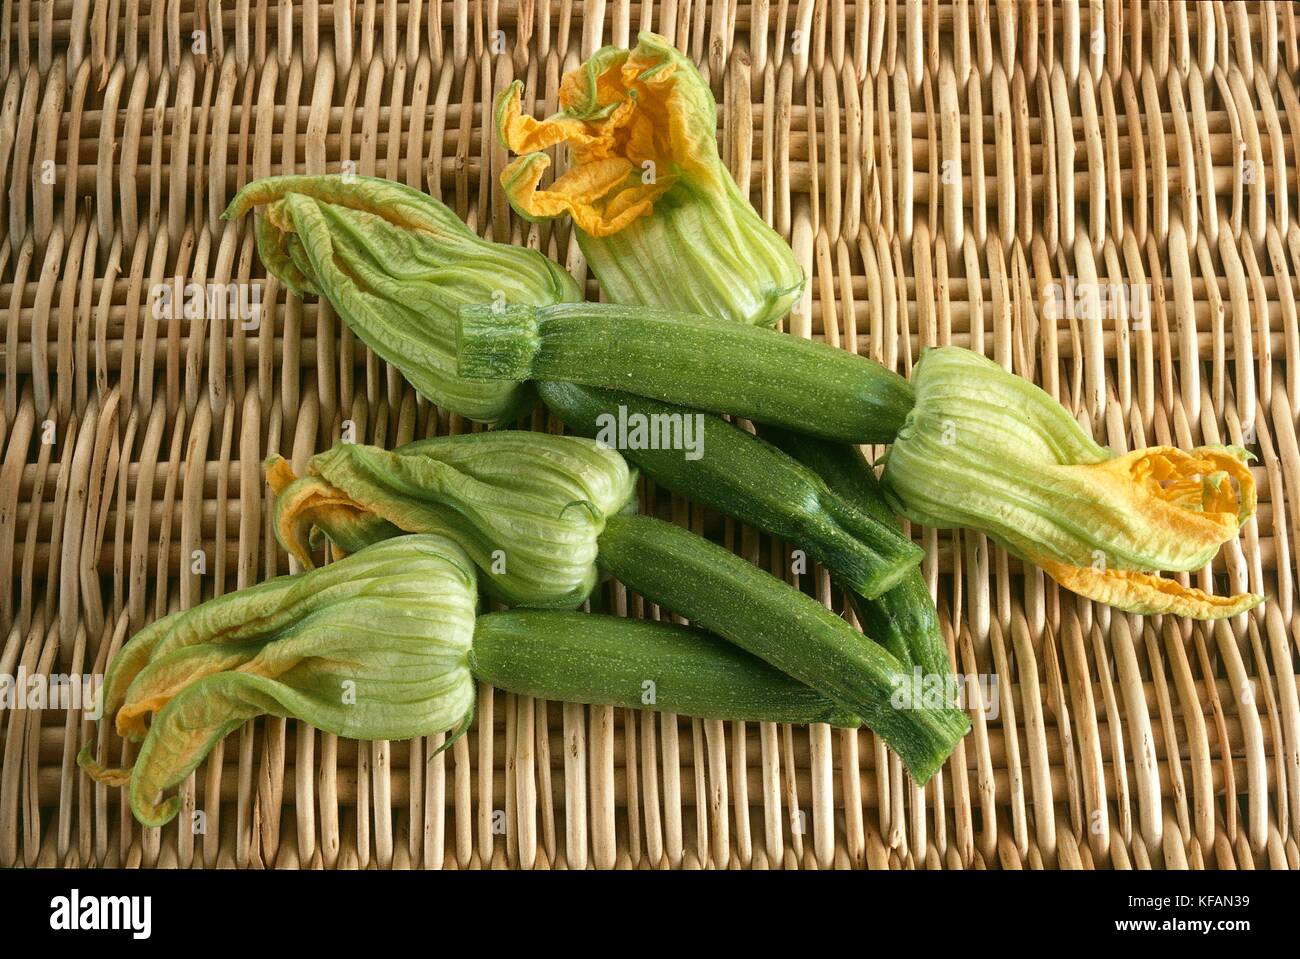 Still Life With Zucchini Flowers Stock Photo